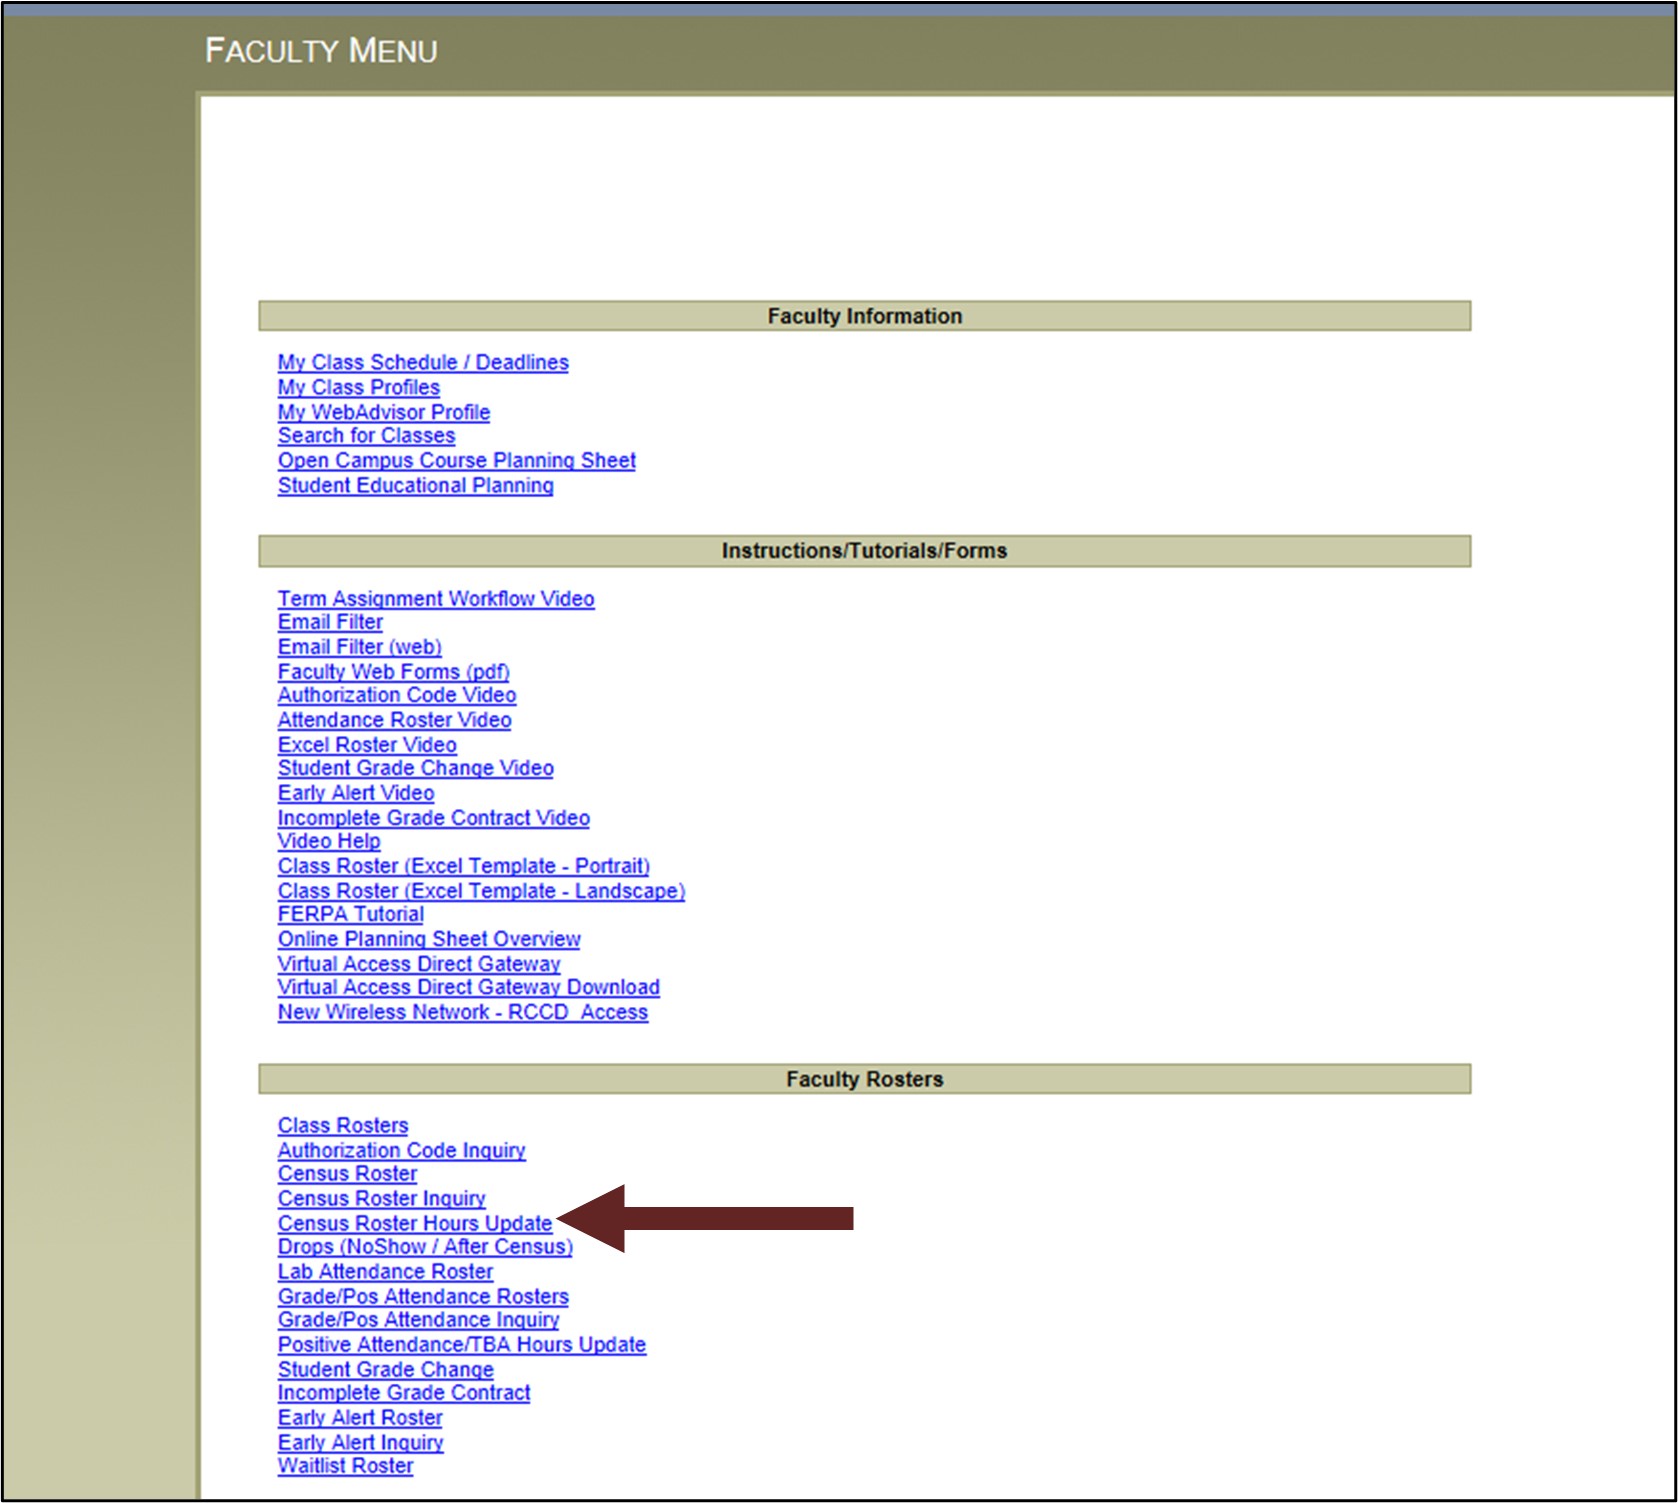 WebAdvisor Faculty Menu with arrow pointing at Census Roster Hours Update